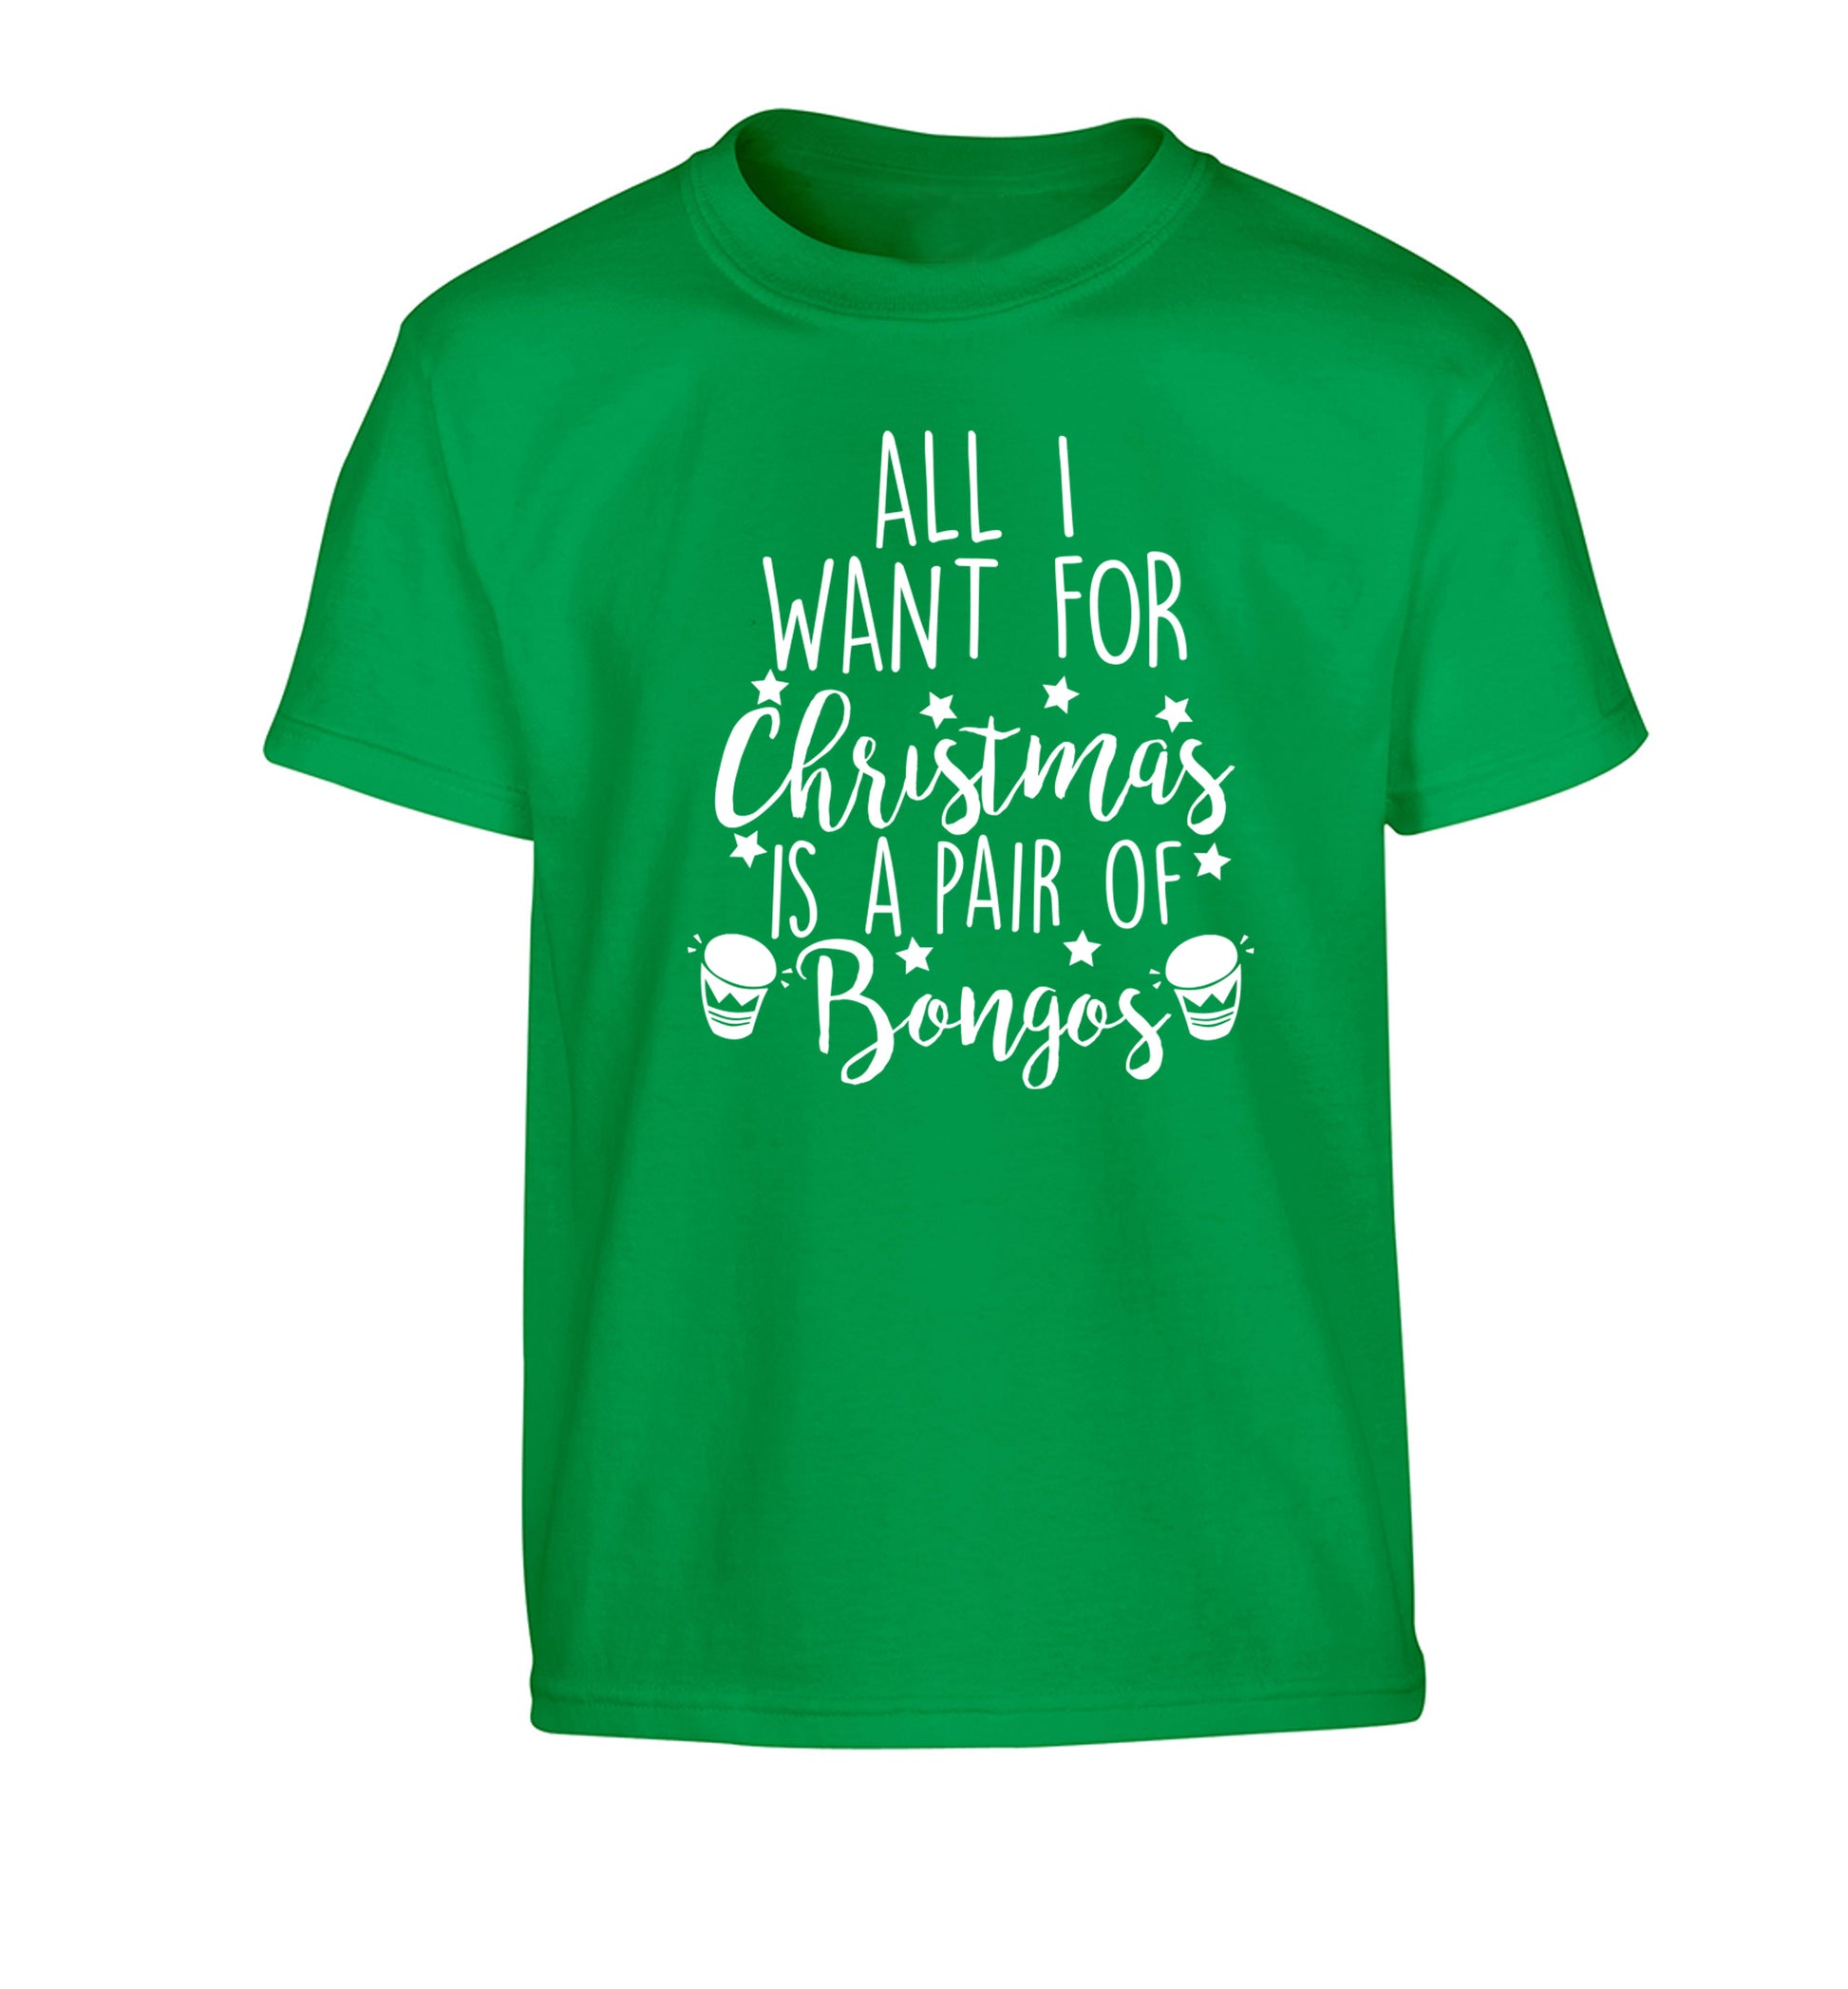 All I want for Christmas is a pair of bongos! Children's green Tshirt 12-14 Years